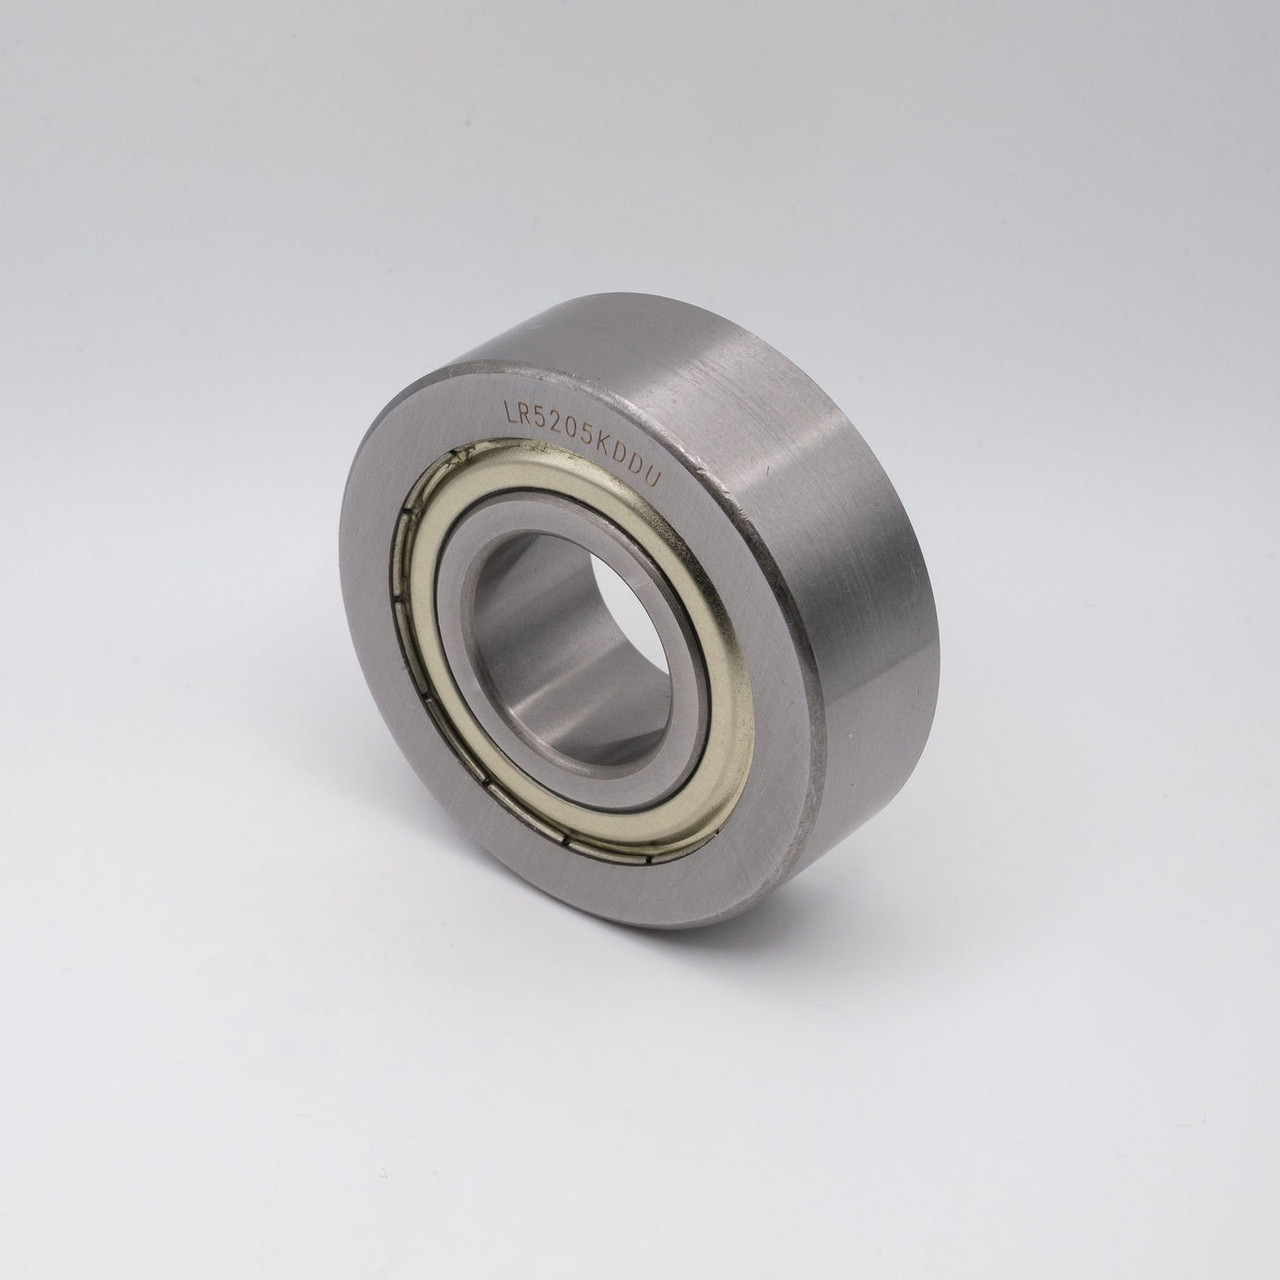 LR5200KDDU Track Roller Ball Bearing 10x32x14mm Front Right Angled View